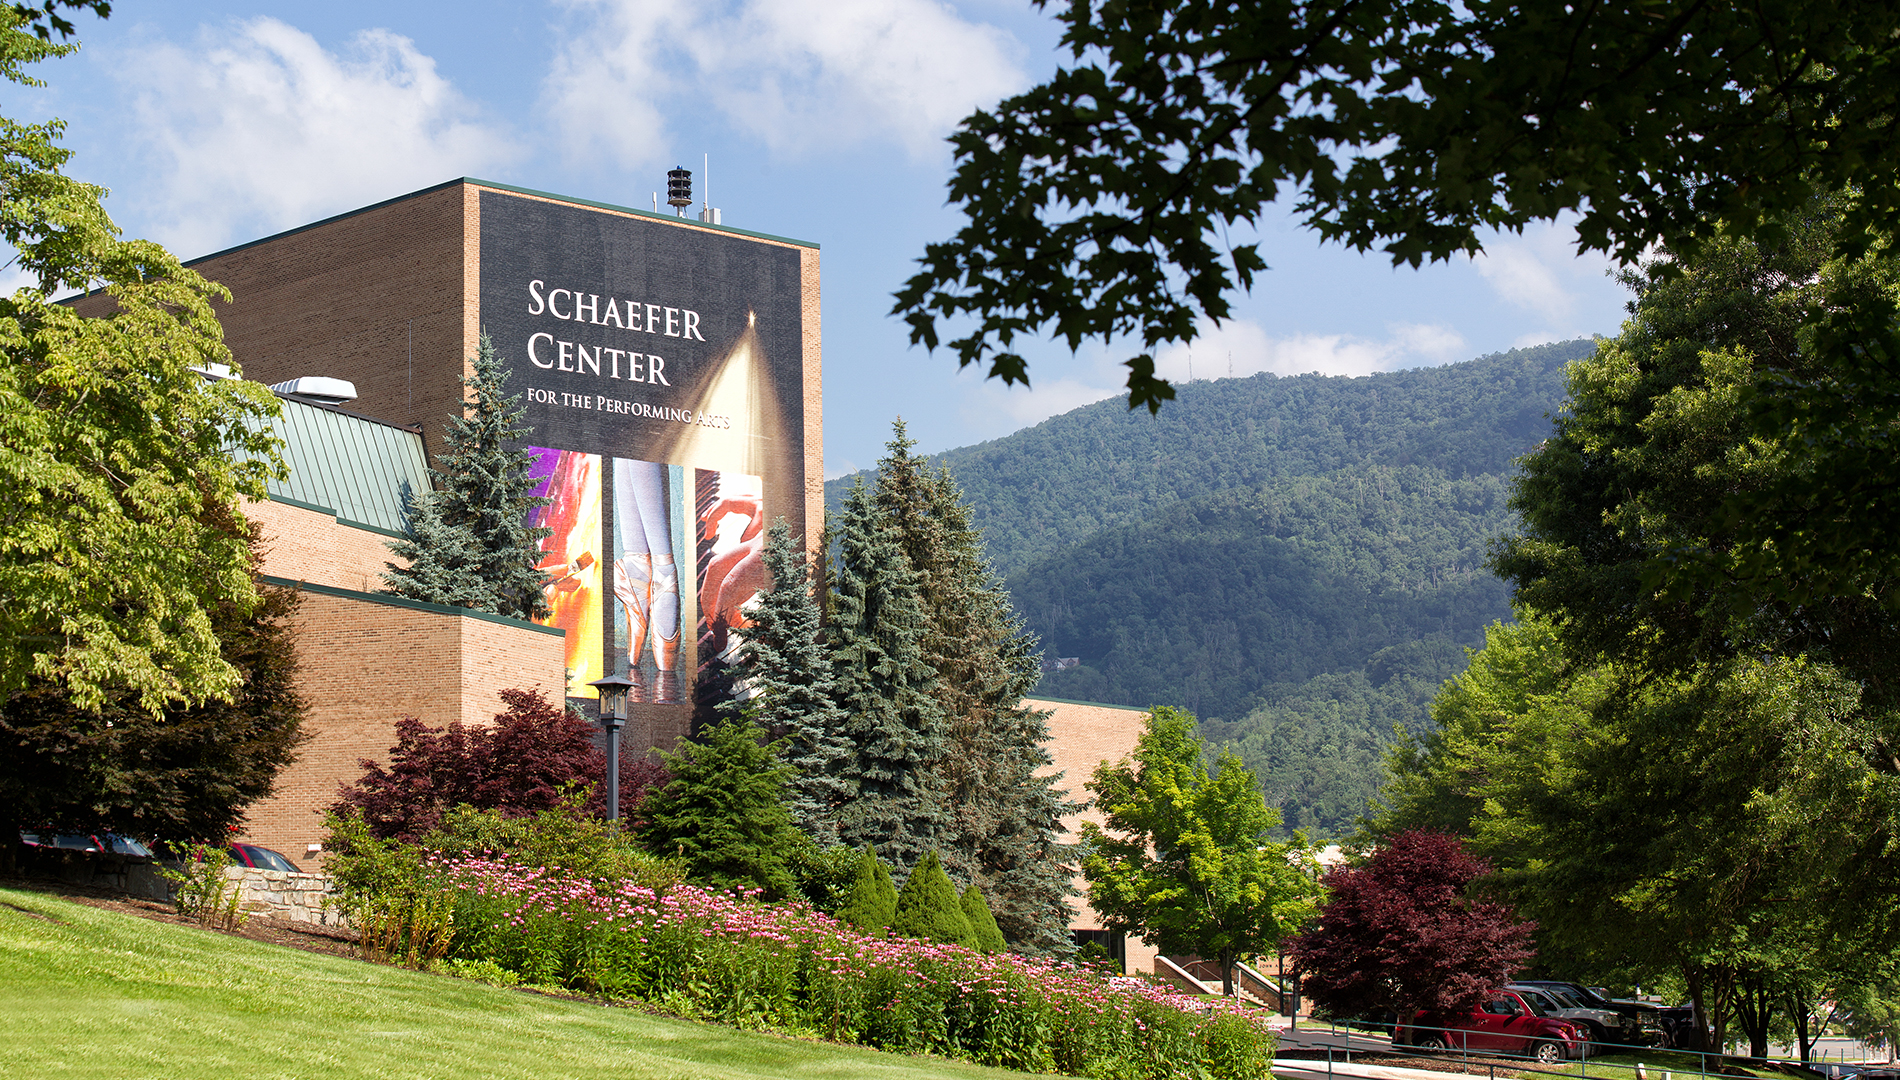 The Schaefer Center for the Performing Arts in Boone, NC